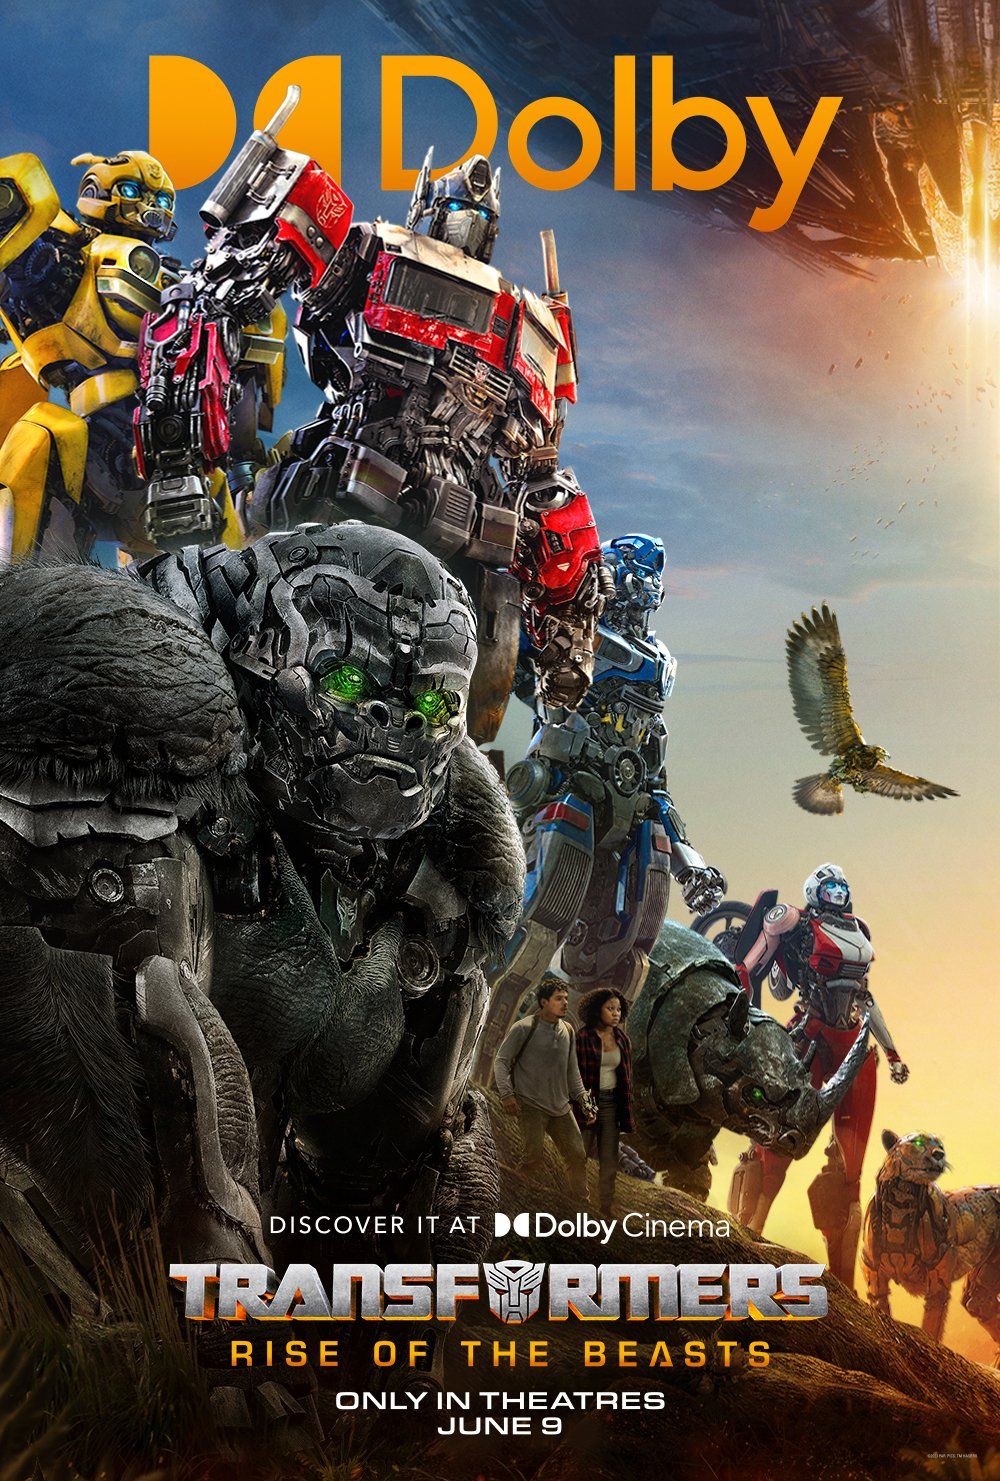 'Transformers: Rise of the Beasts' Dolby poster